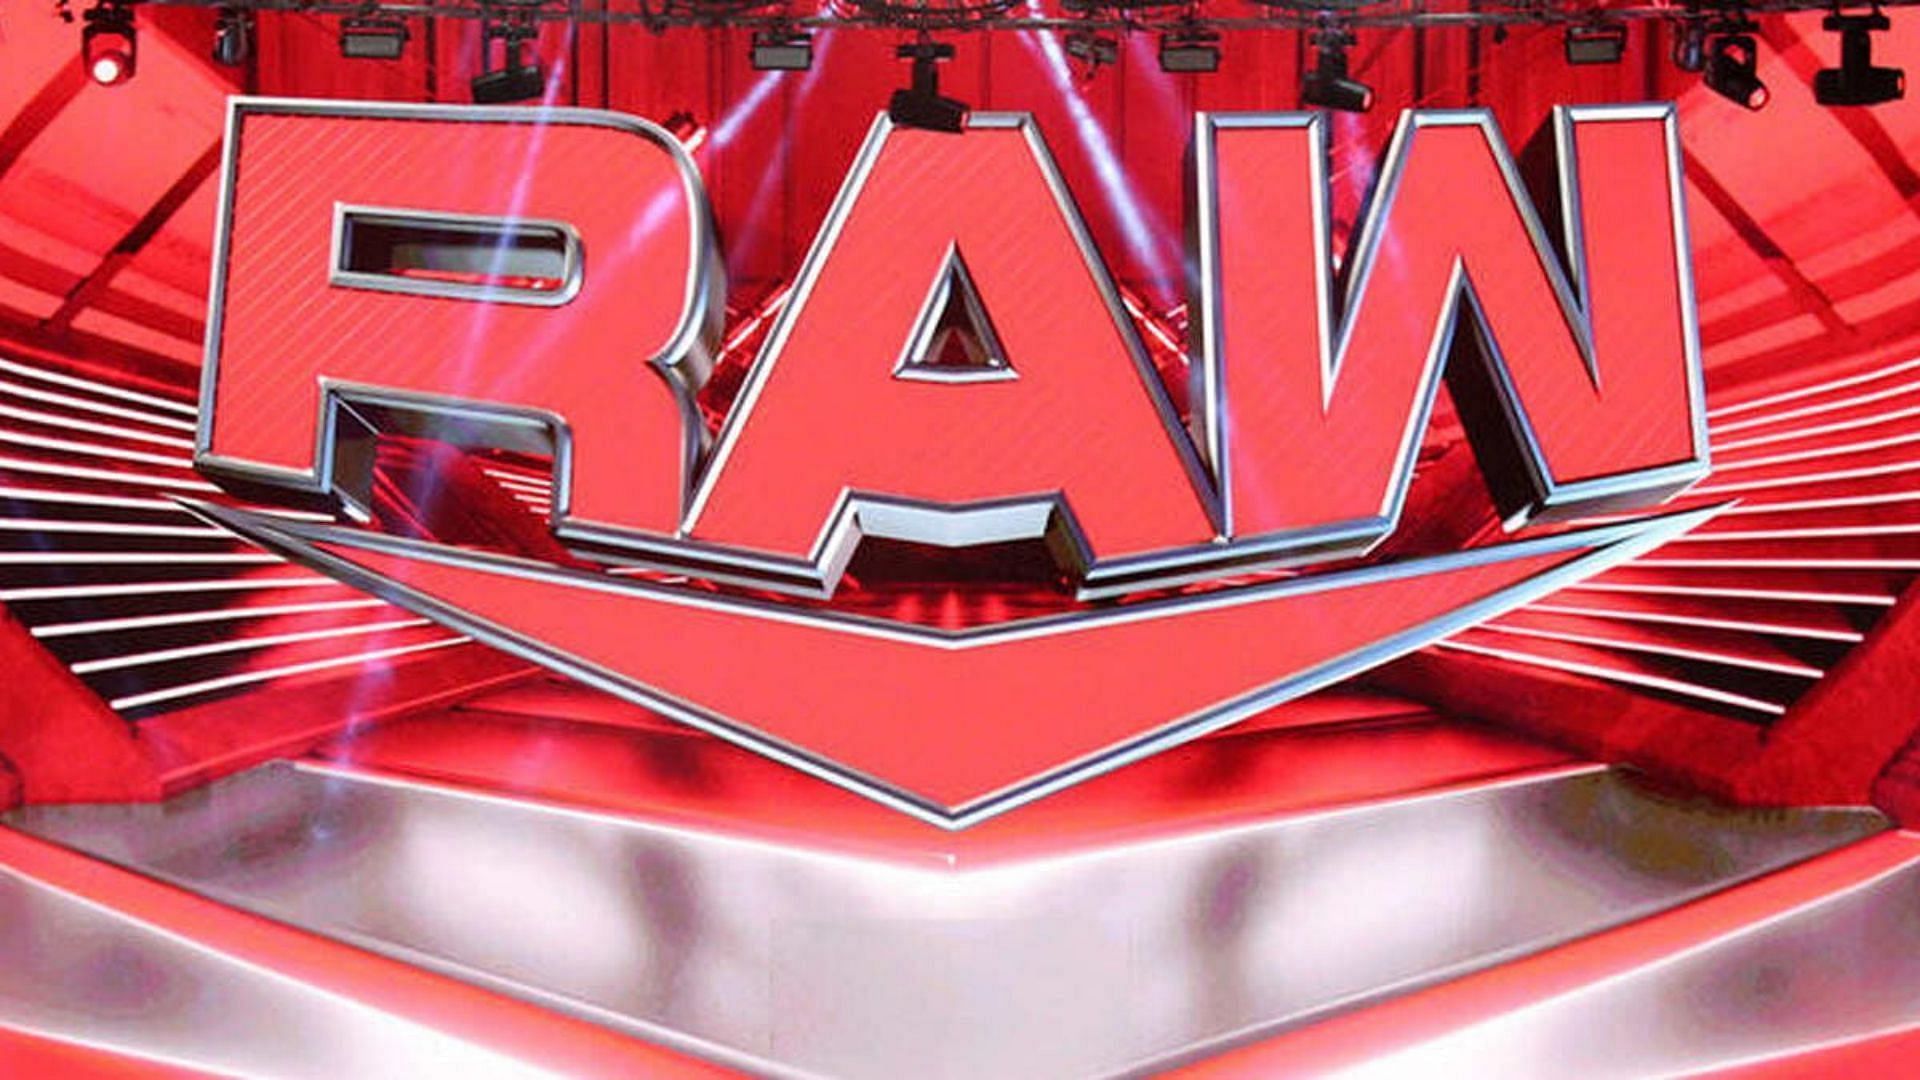 RAW is the flagship brand of WWE